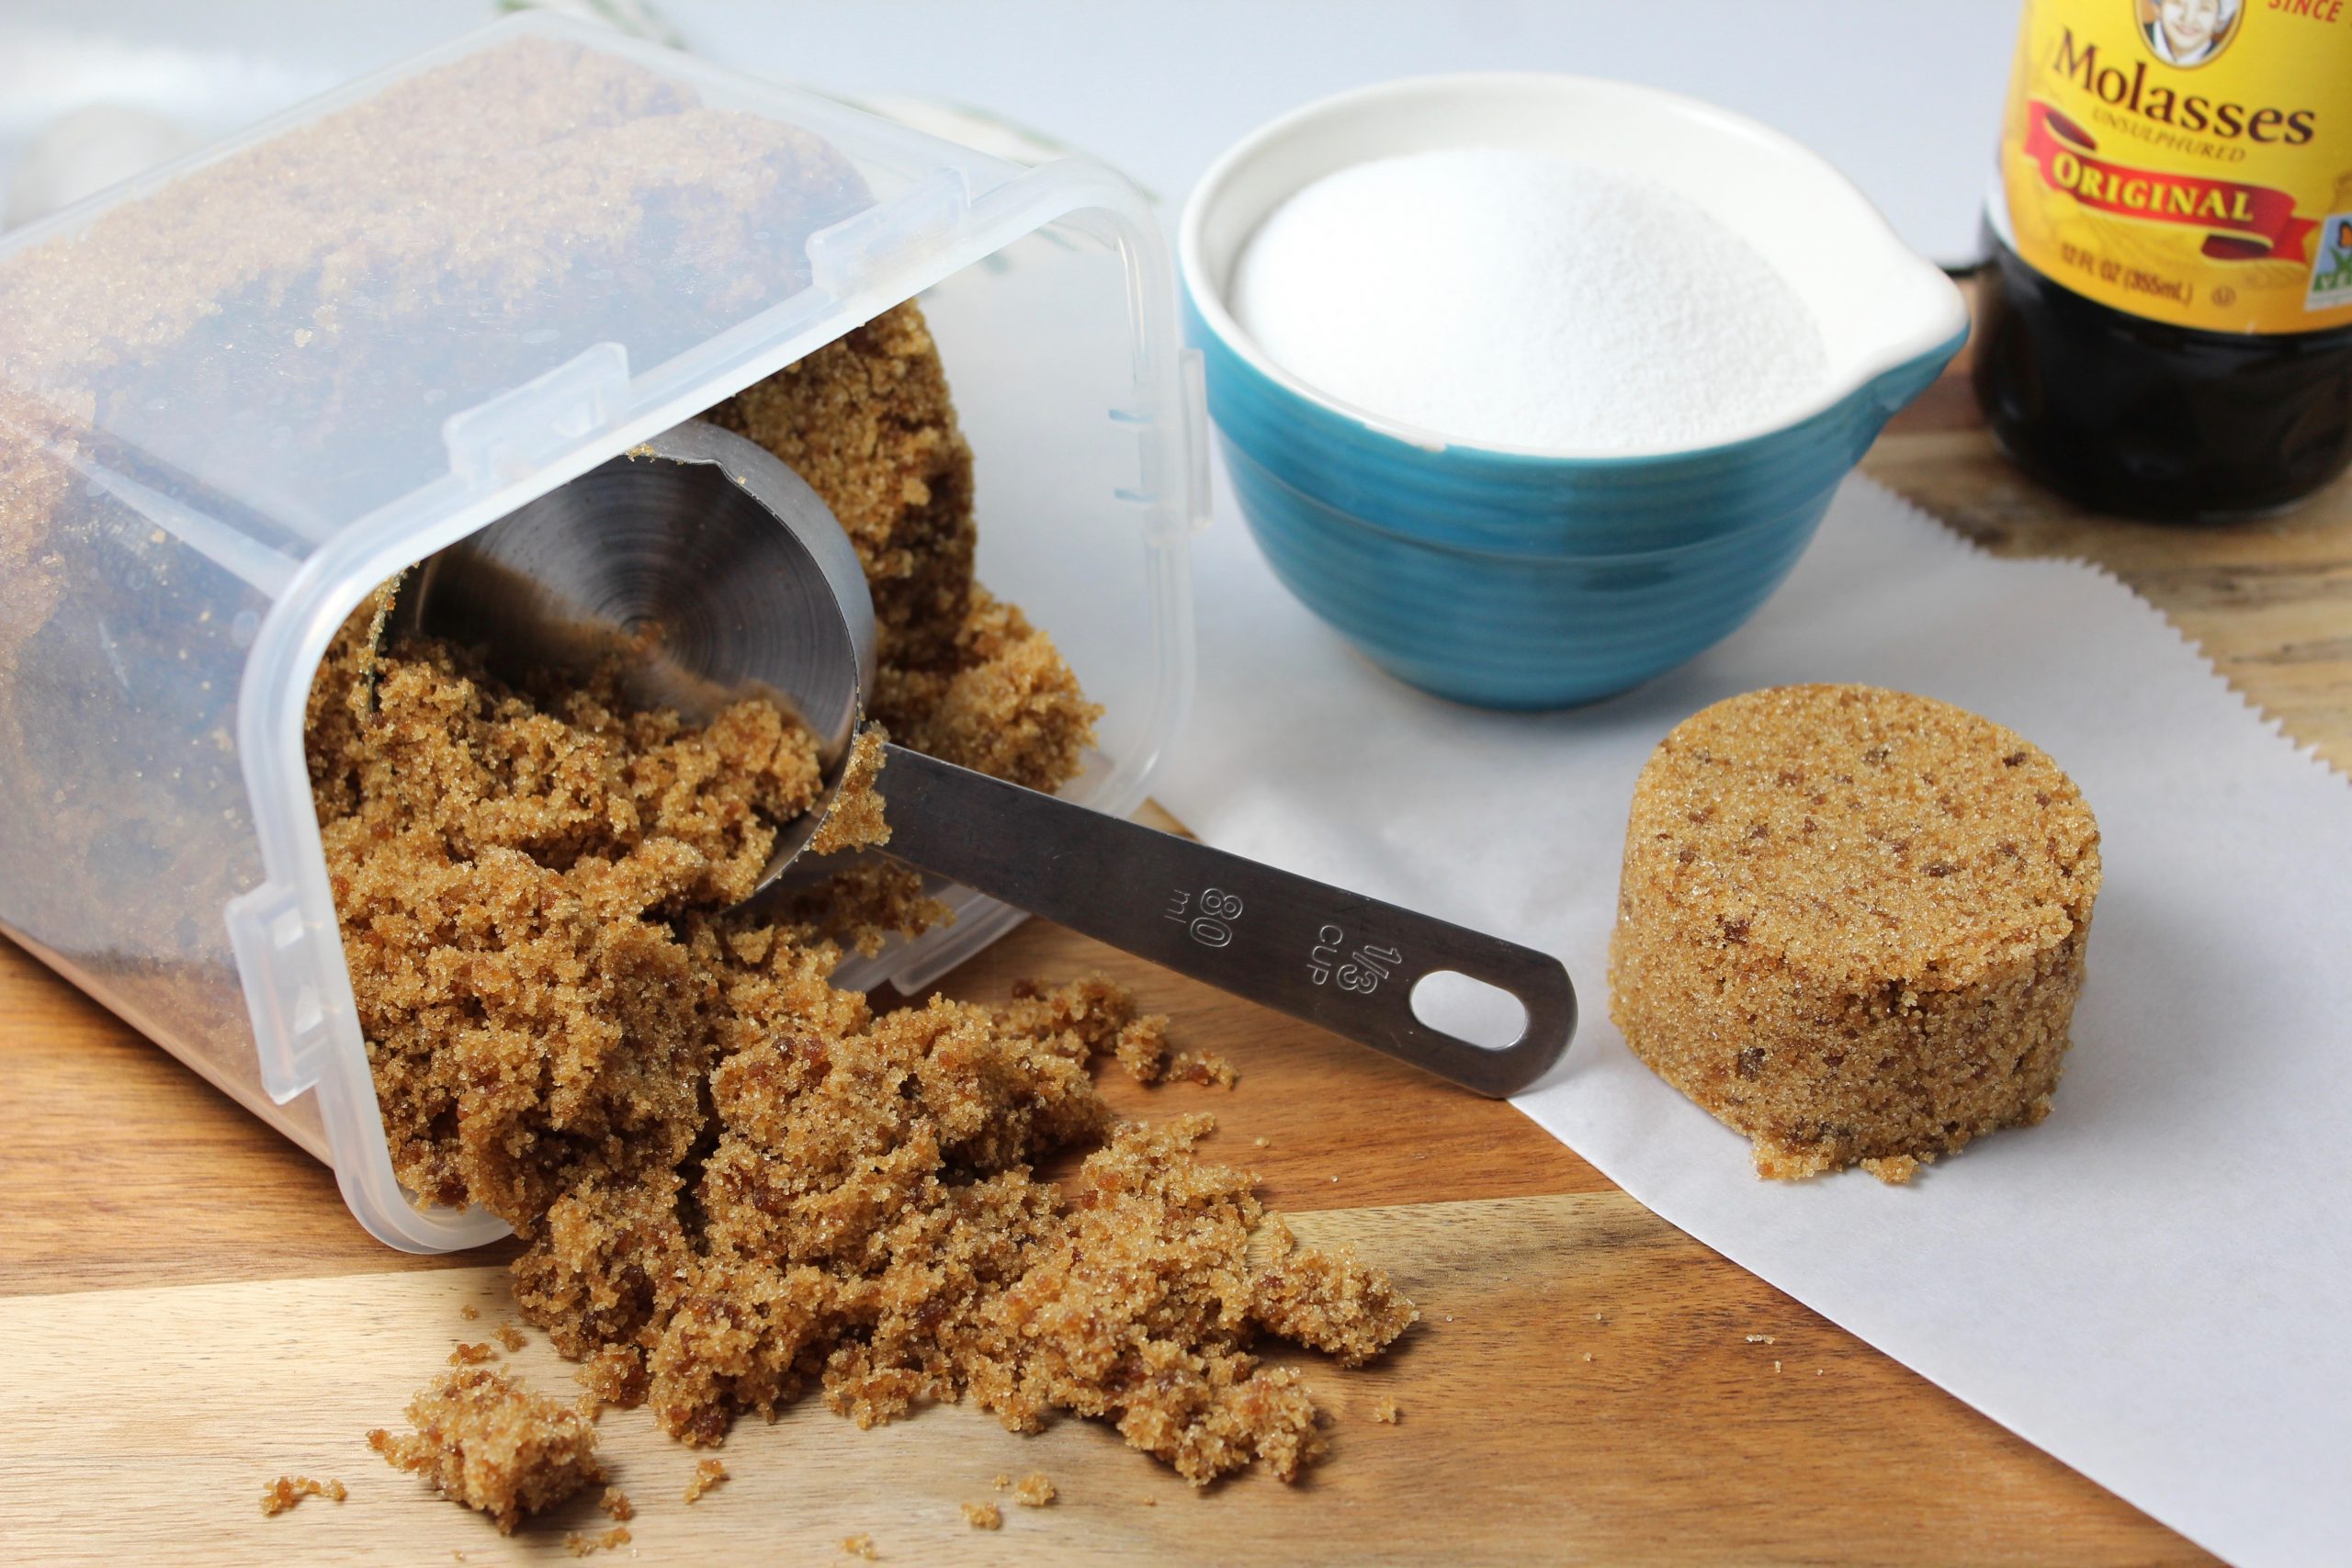 How to Make Brown Sugar The Easy Way